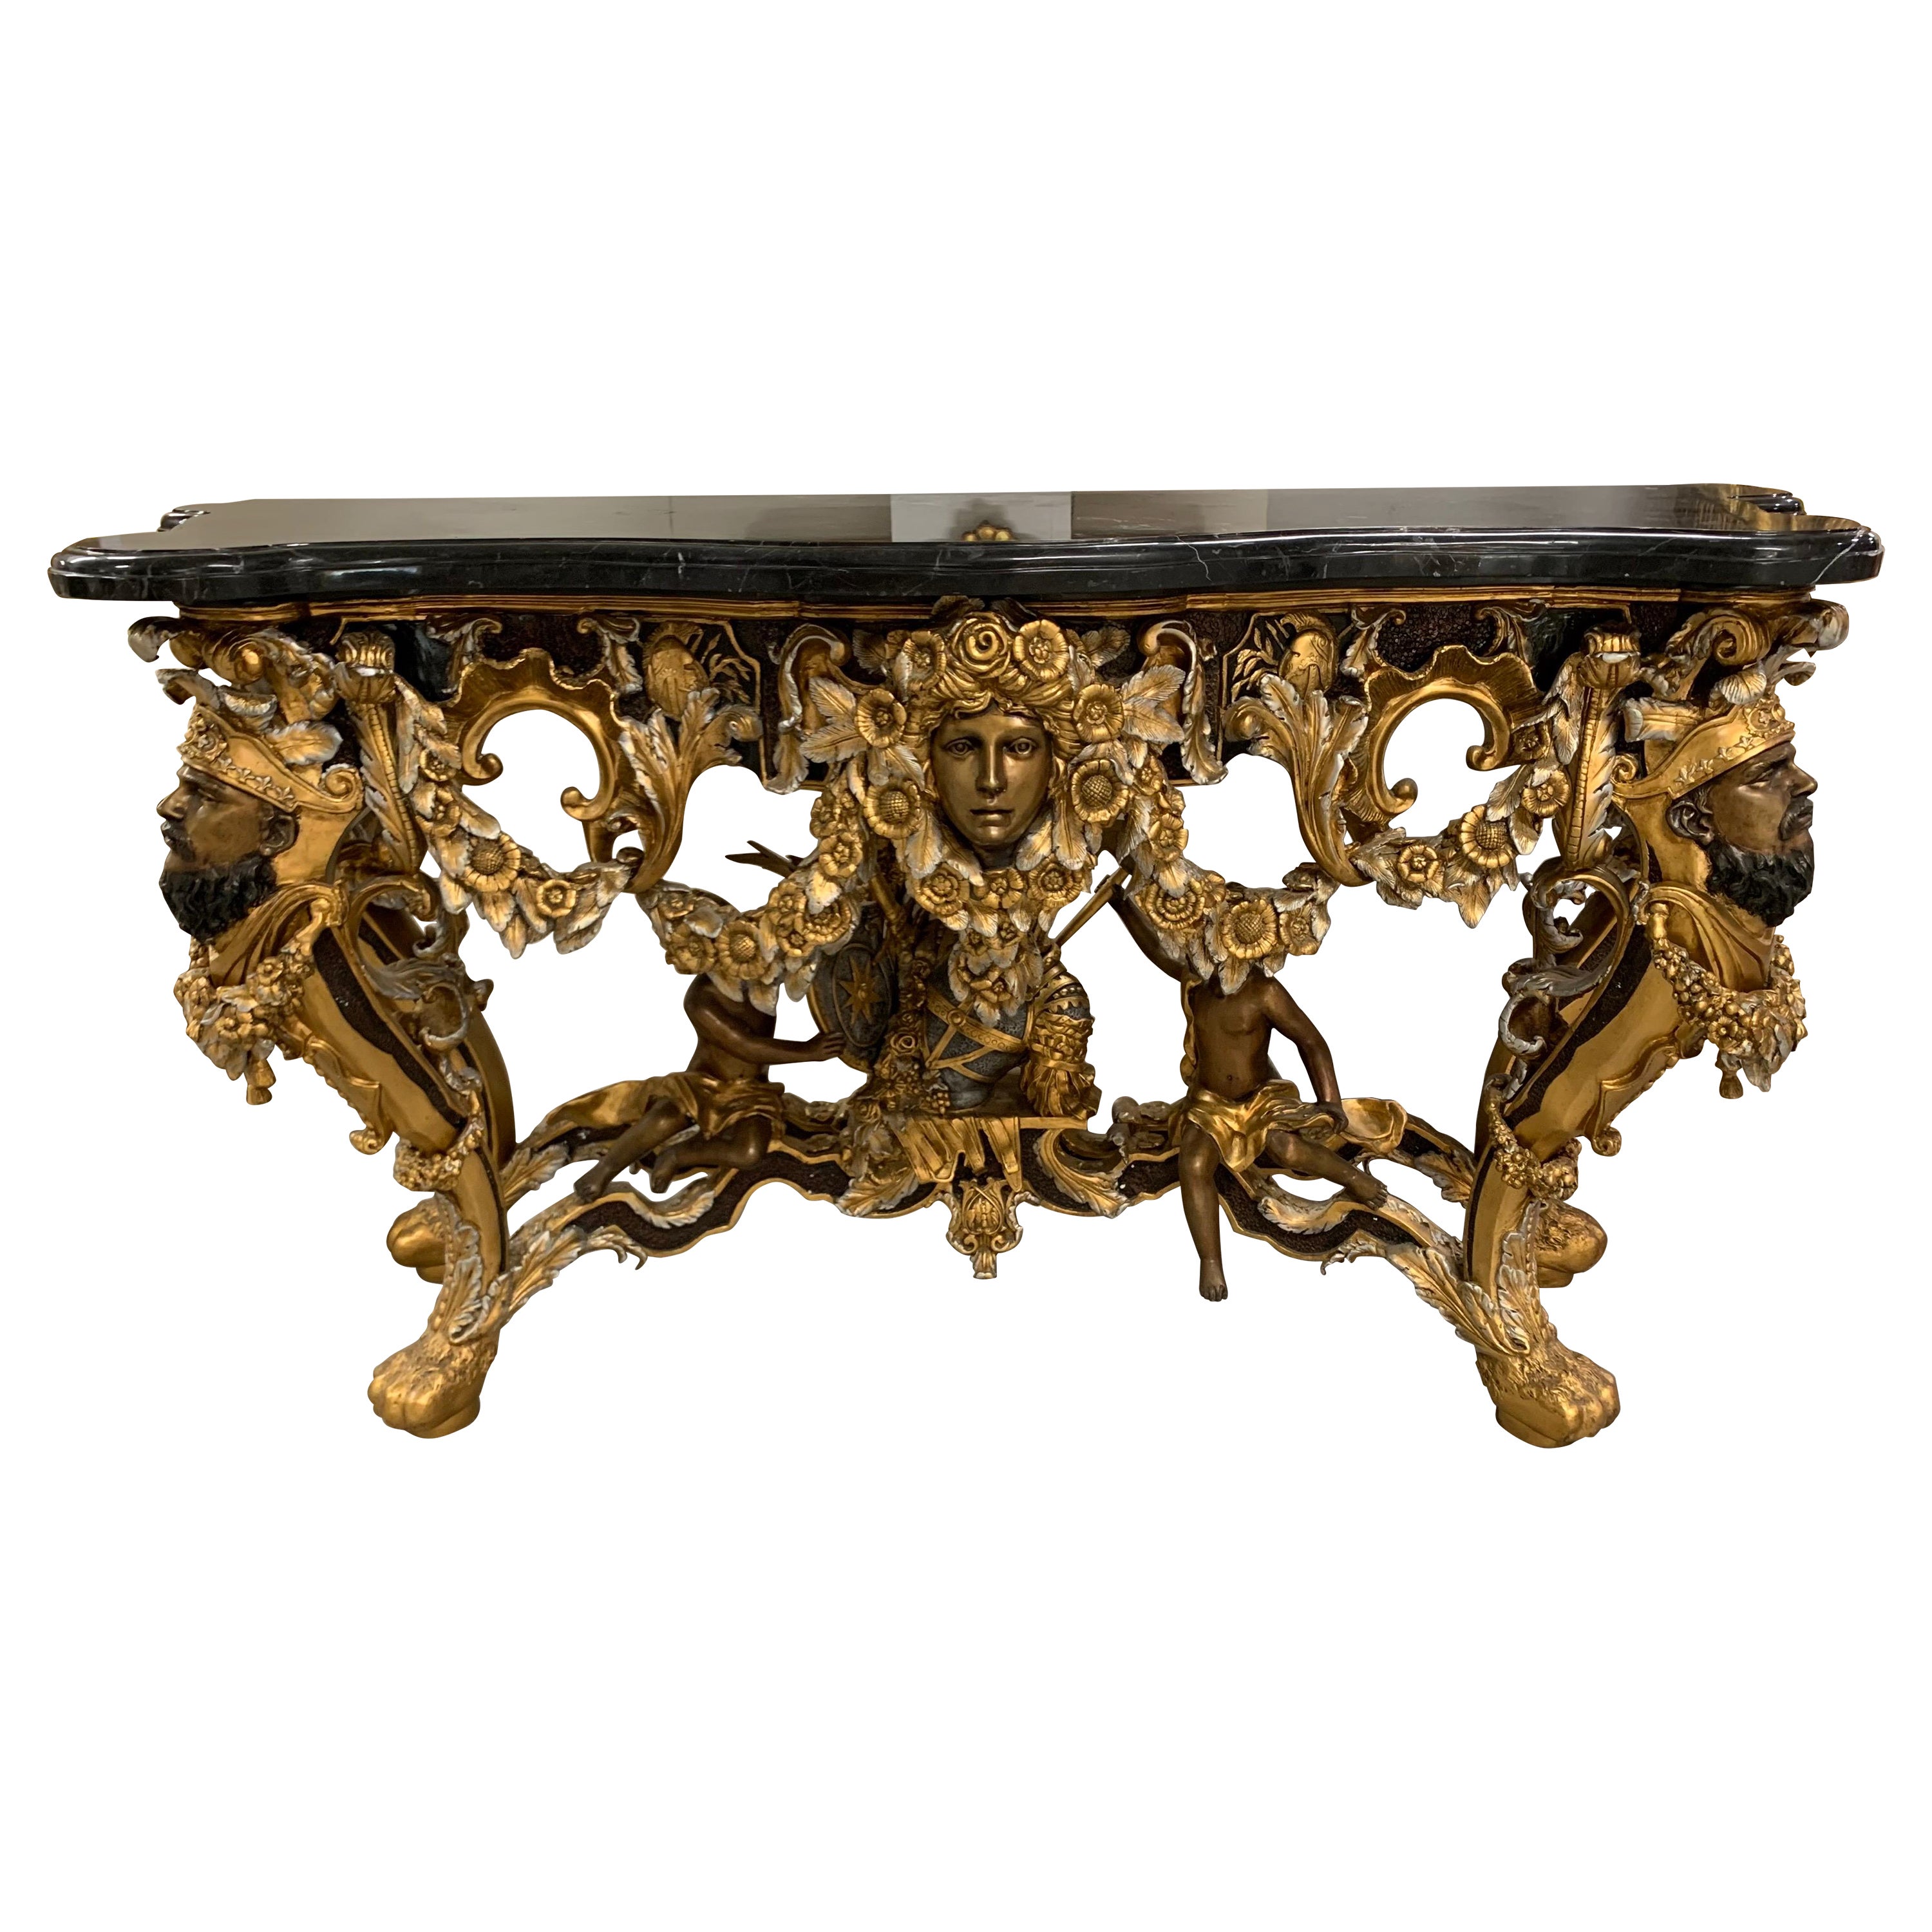 Baroque Ornate Carved Bronze Figural Console Table with Marble Top Made in Italy